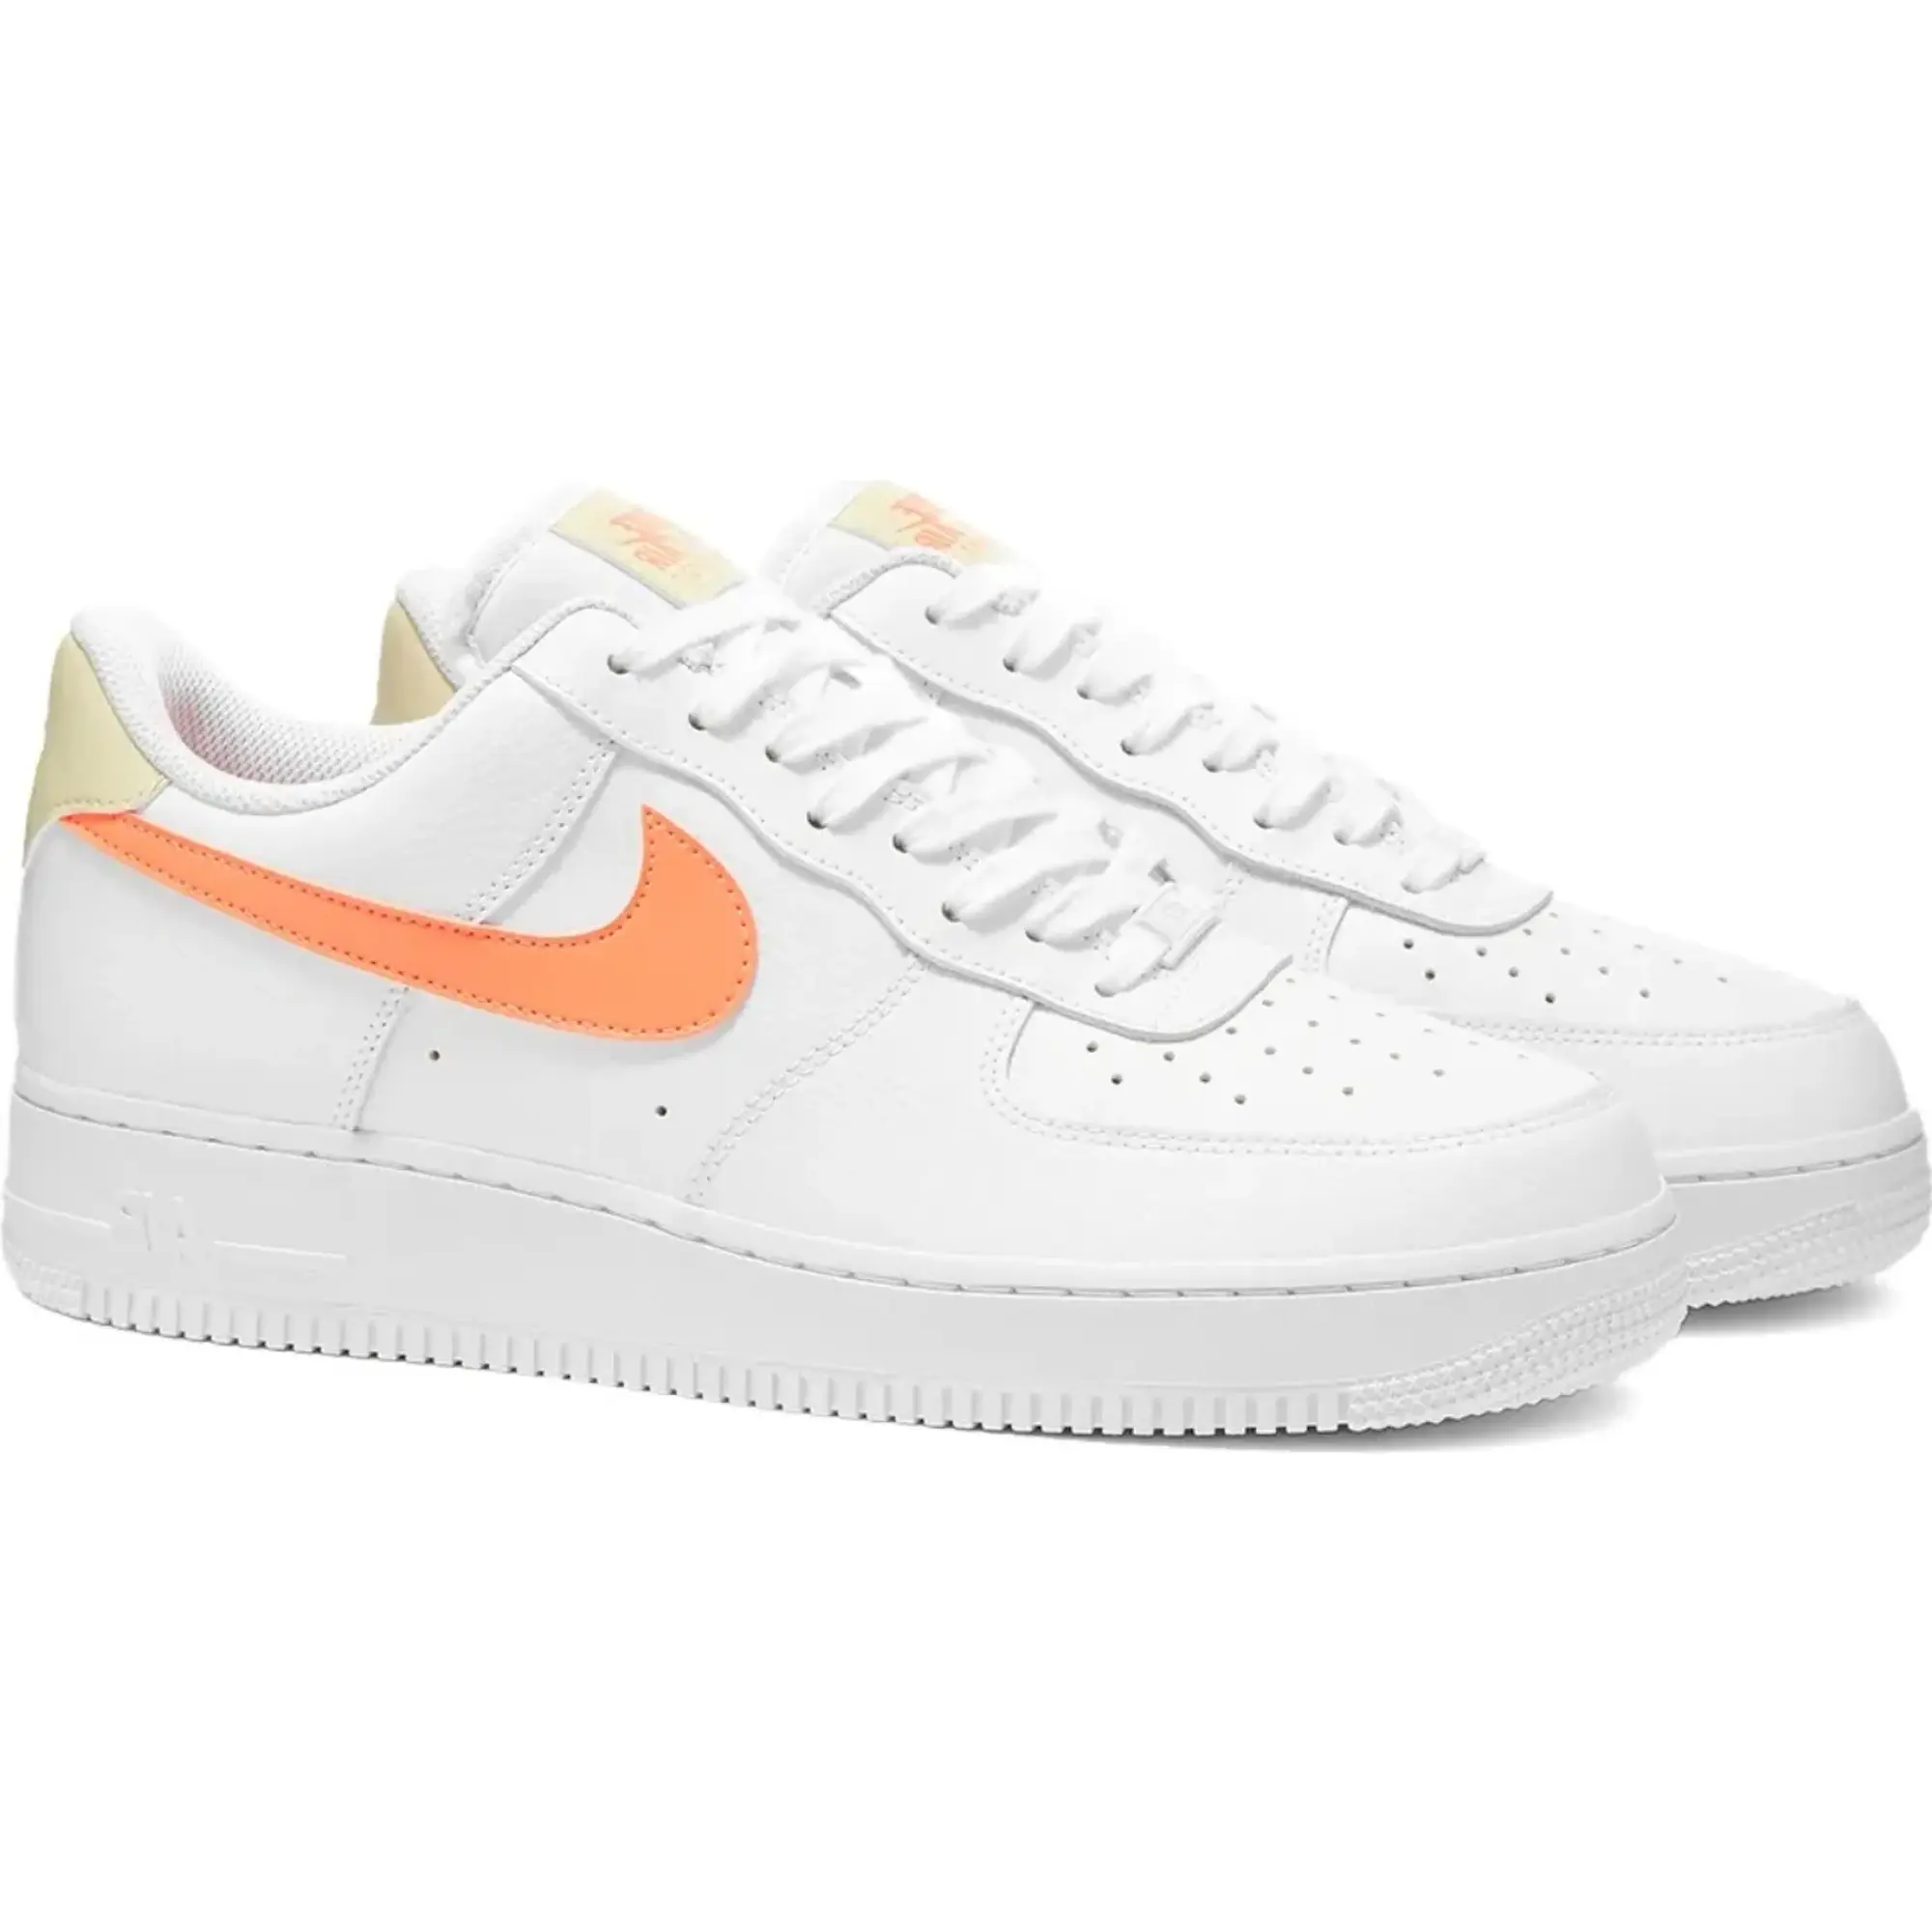 Nike Womens AIR FORCE 1 07 ATOMIC PINK Shoes